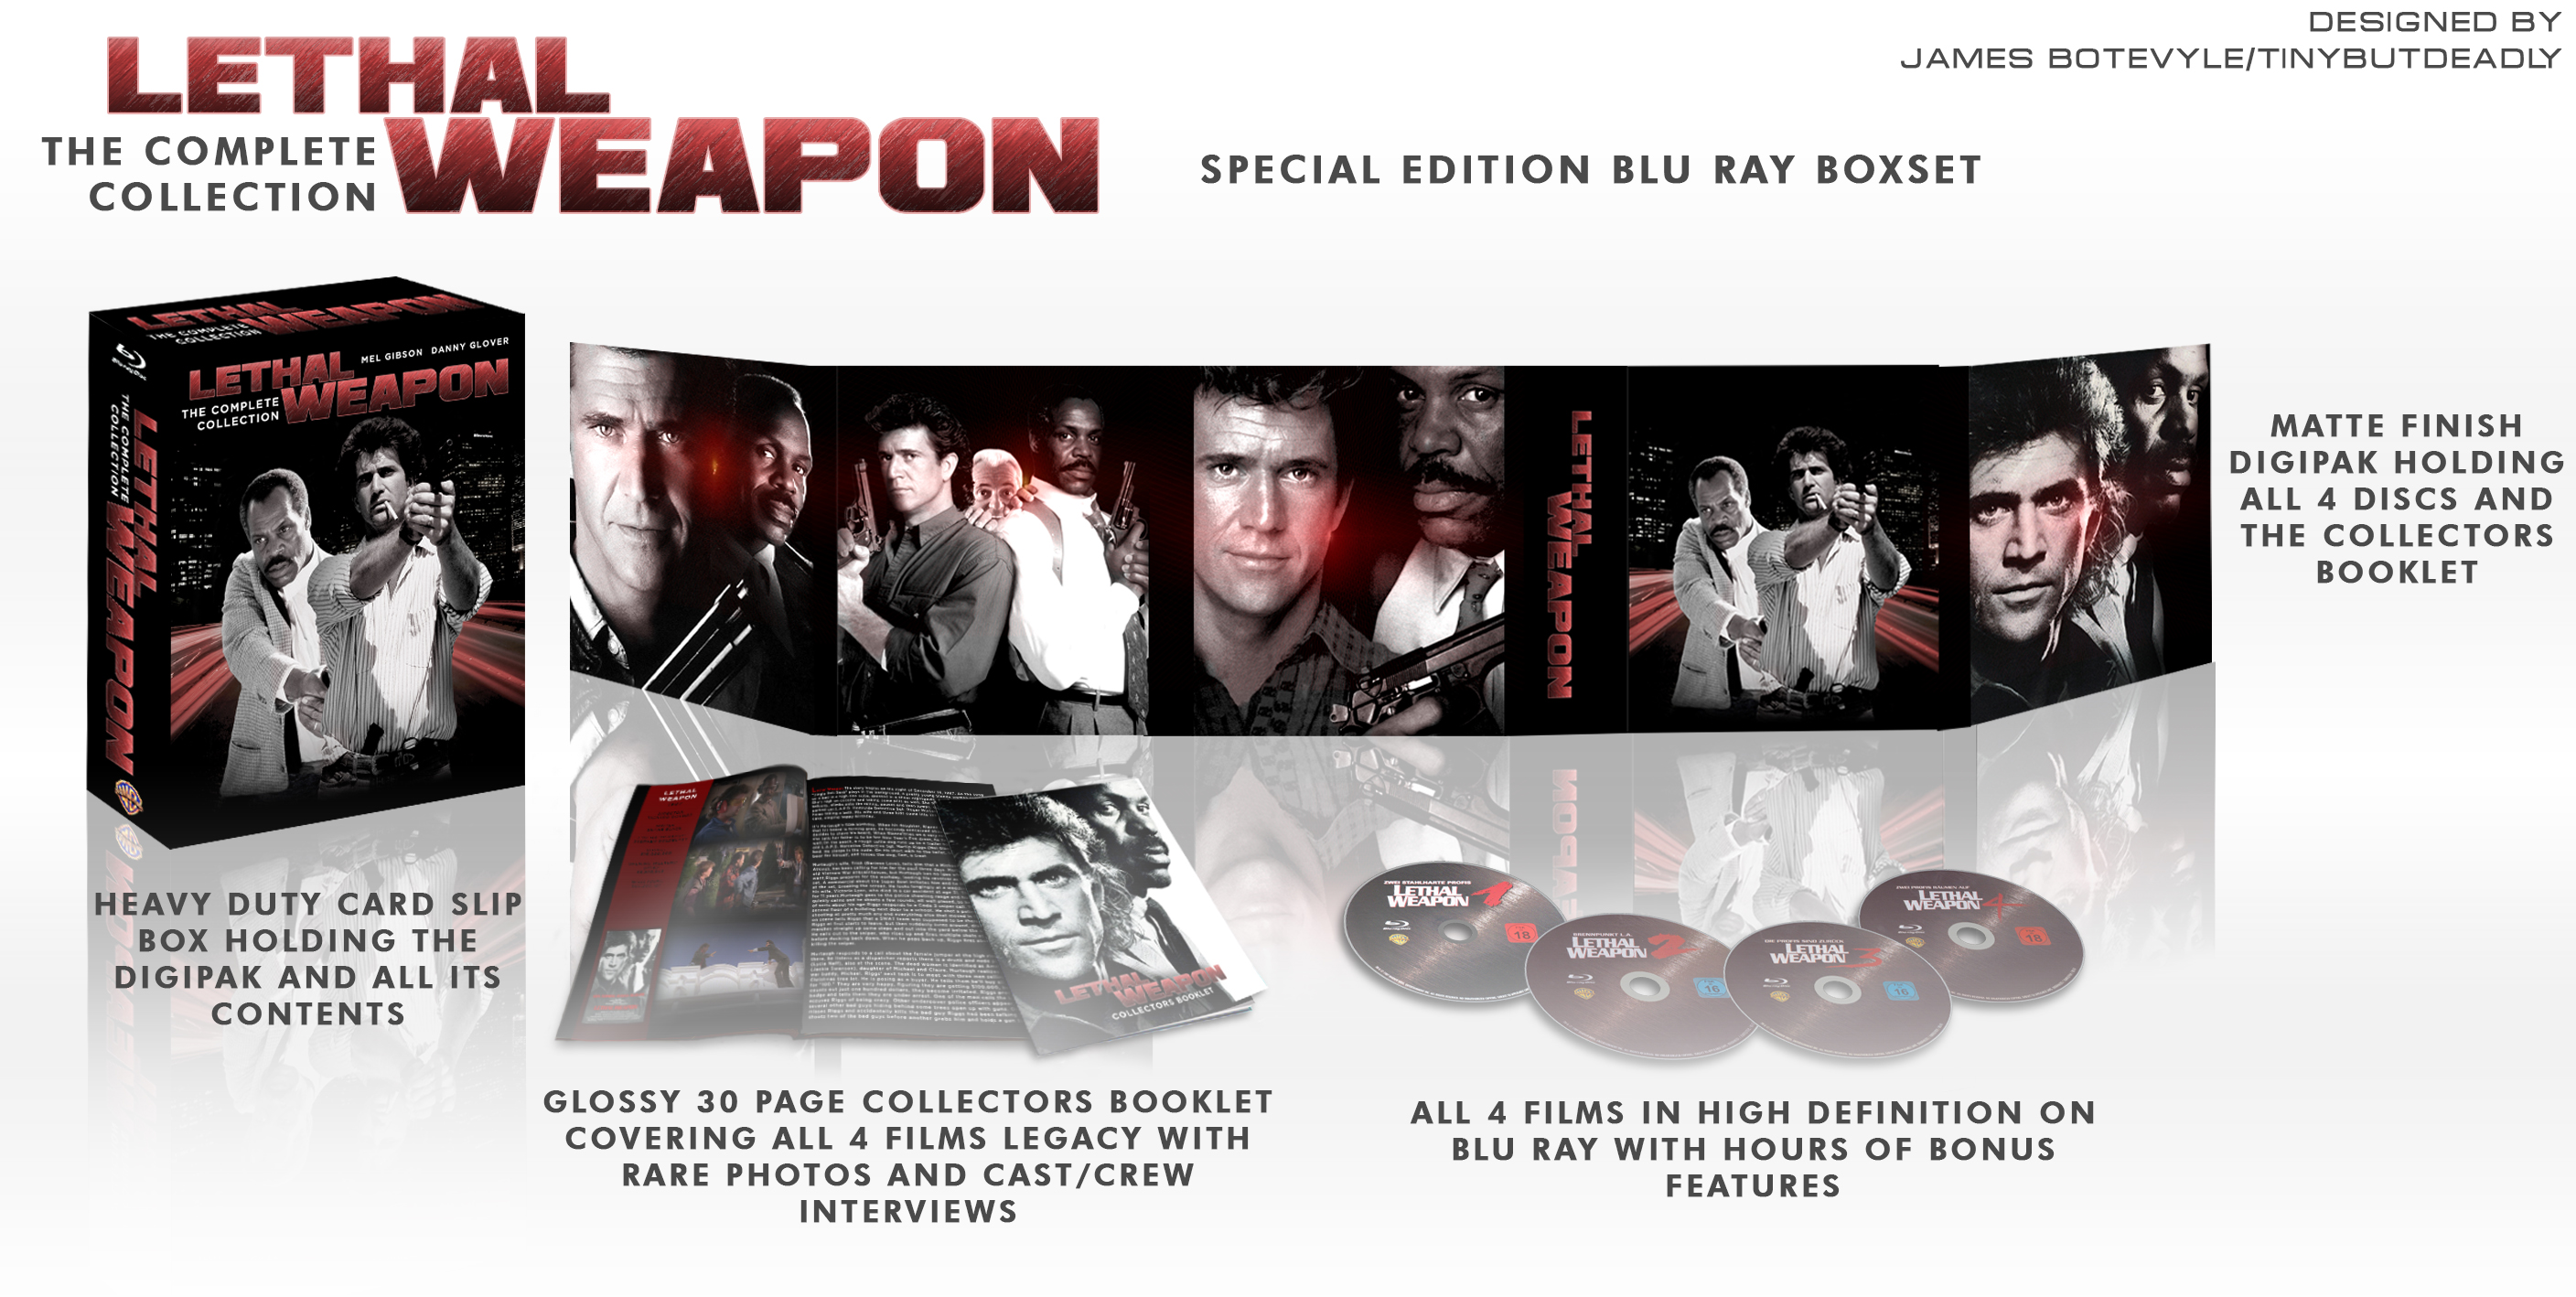 Lethal Weapon: Blu Ray Box Set by TinyButDeadly on DeviantArt